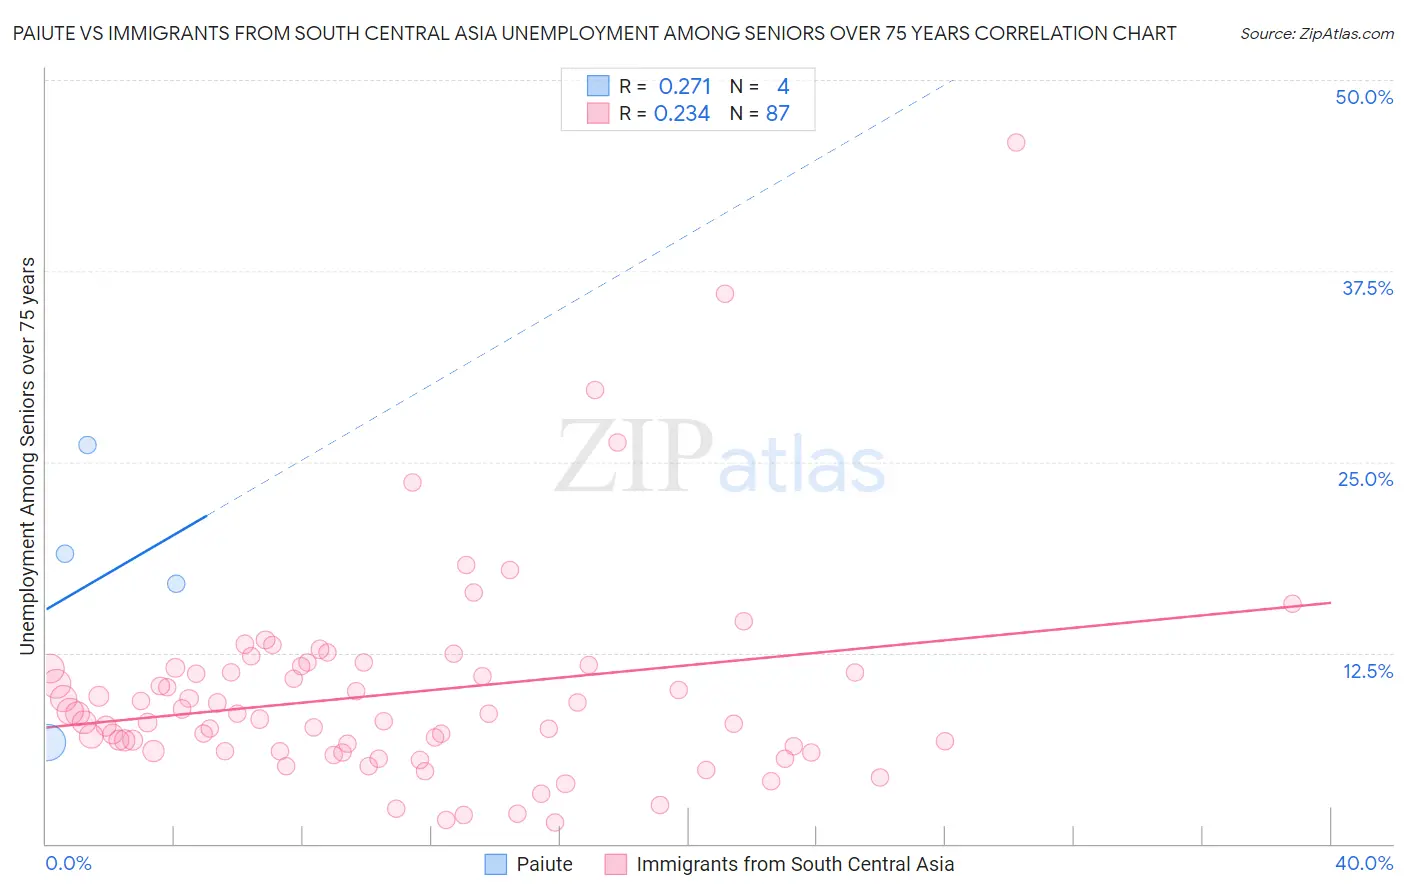 Paiute vs Immigrants from South Central Asia Unemployment Among Seniors over 75 years